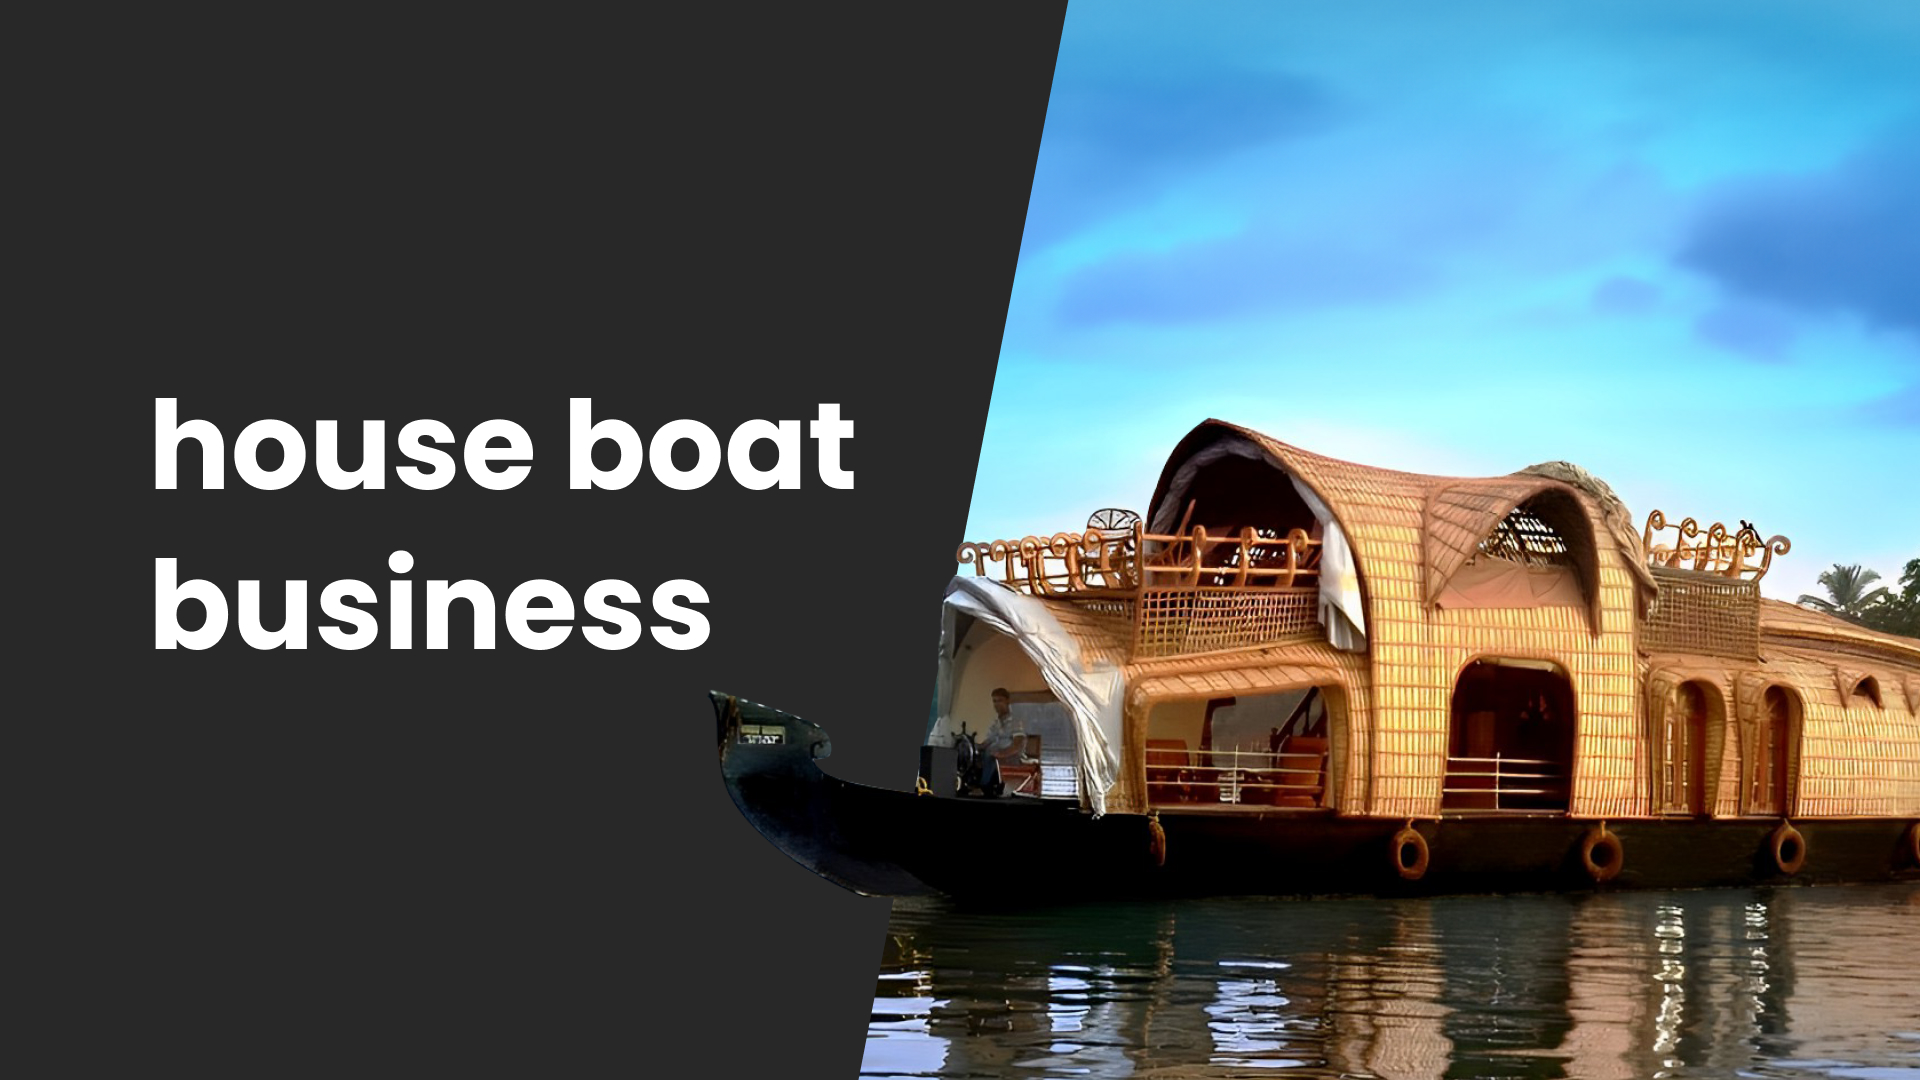 Course Trailer: Start a Successful Houseboat Business and earn 6 lakhs per month. Watch to know more.